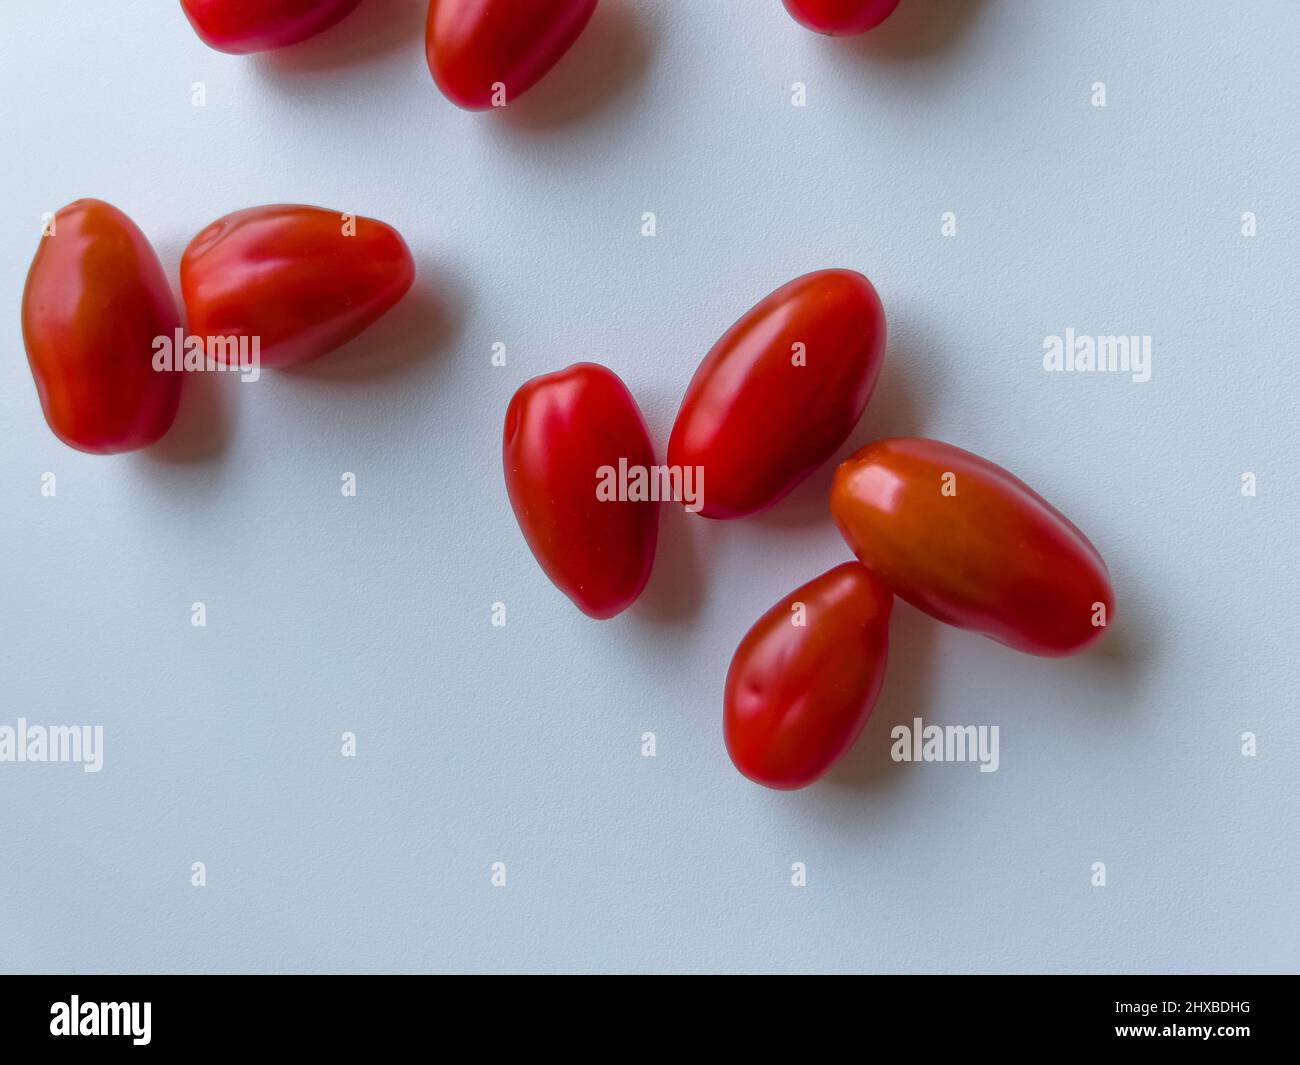 Cherry tomatoes lying on a white table Stock Photo